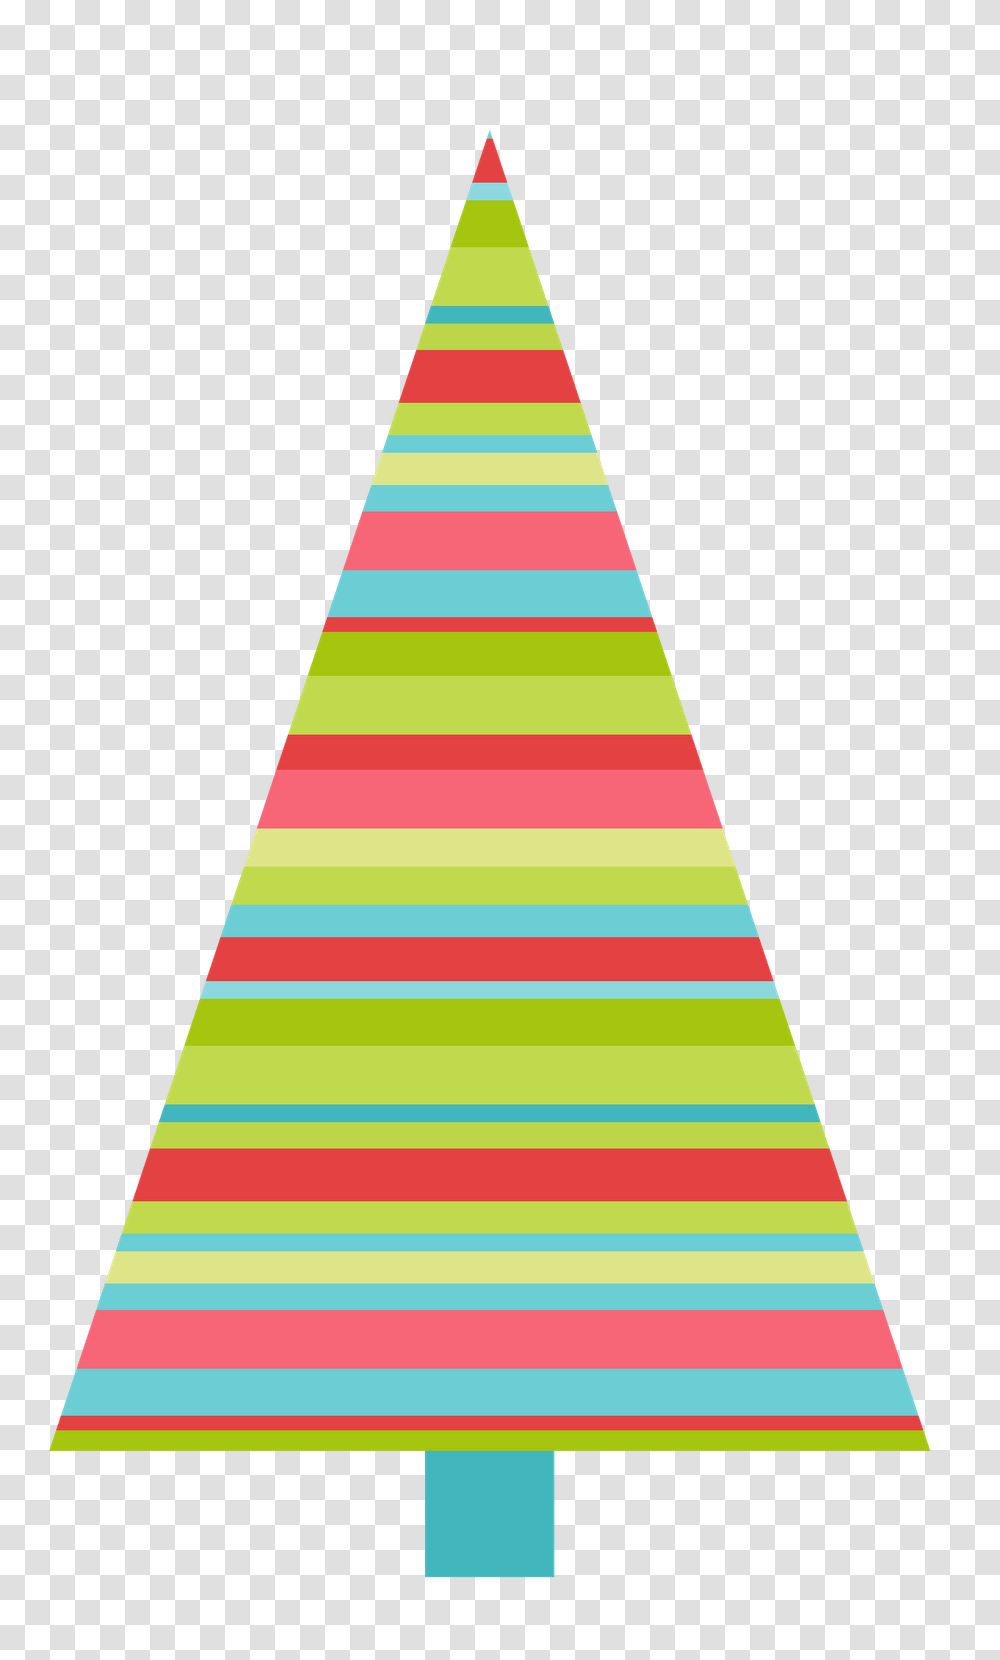 Colorful Christmas Tree Clip Art Clip Art, Triangle, Rug, Cone Transparent Png